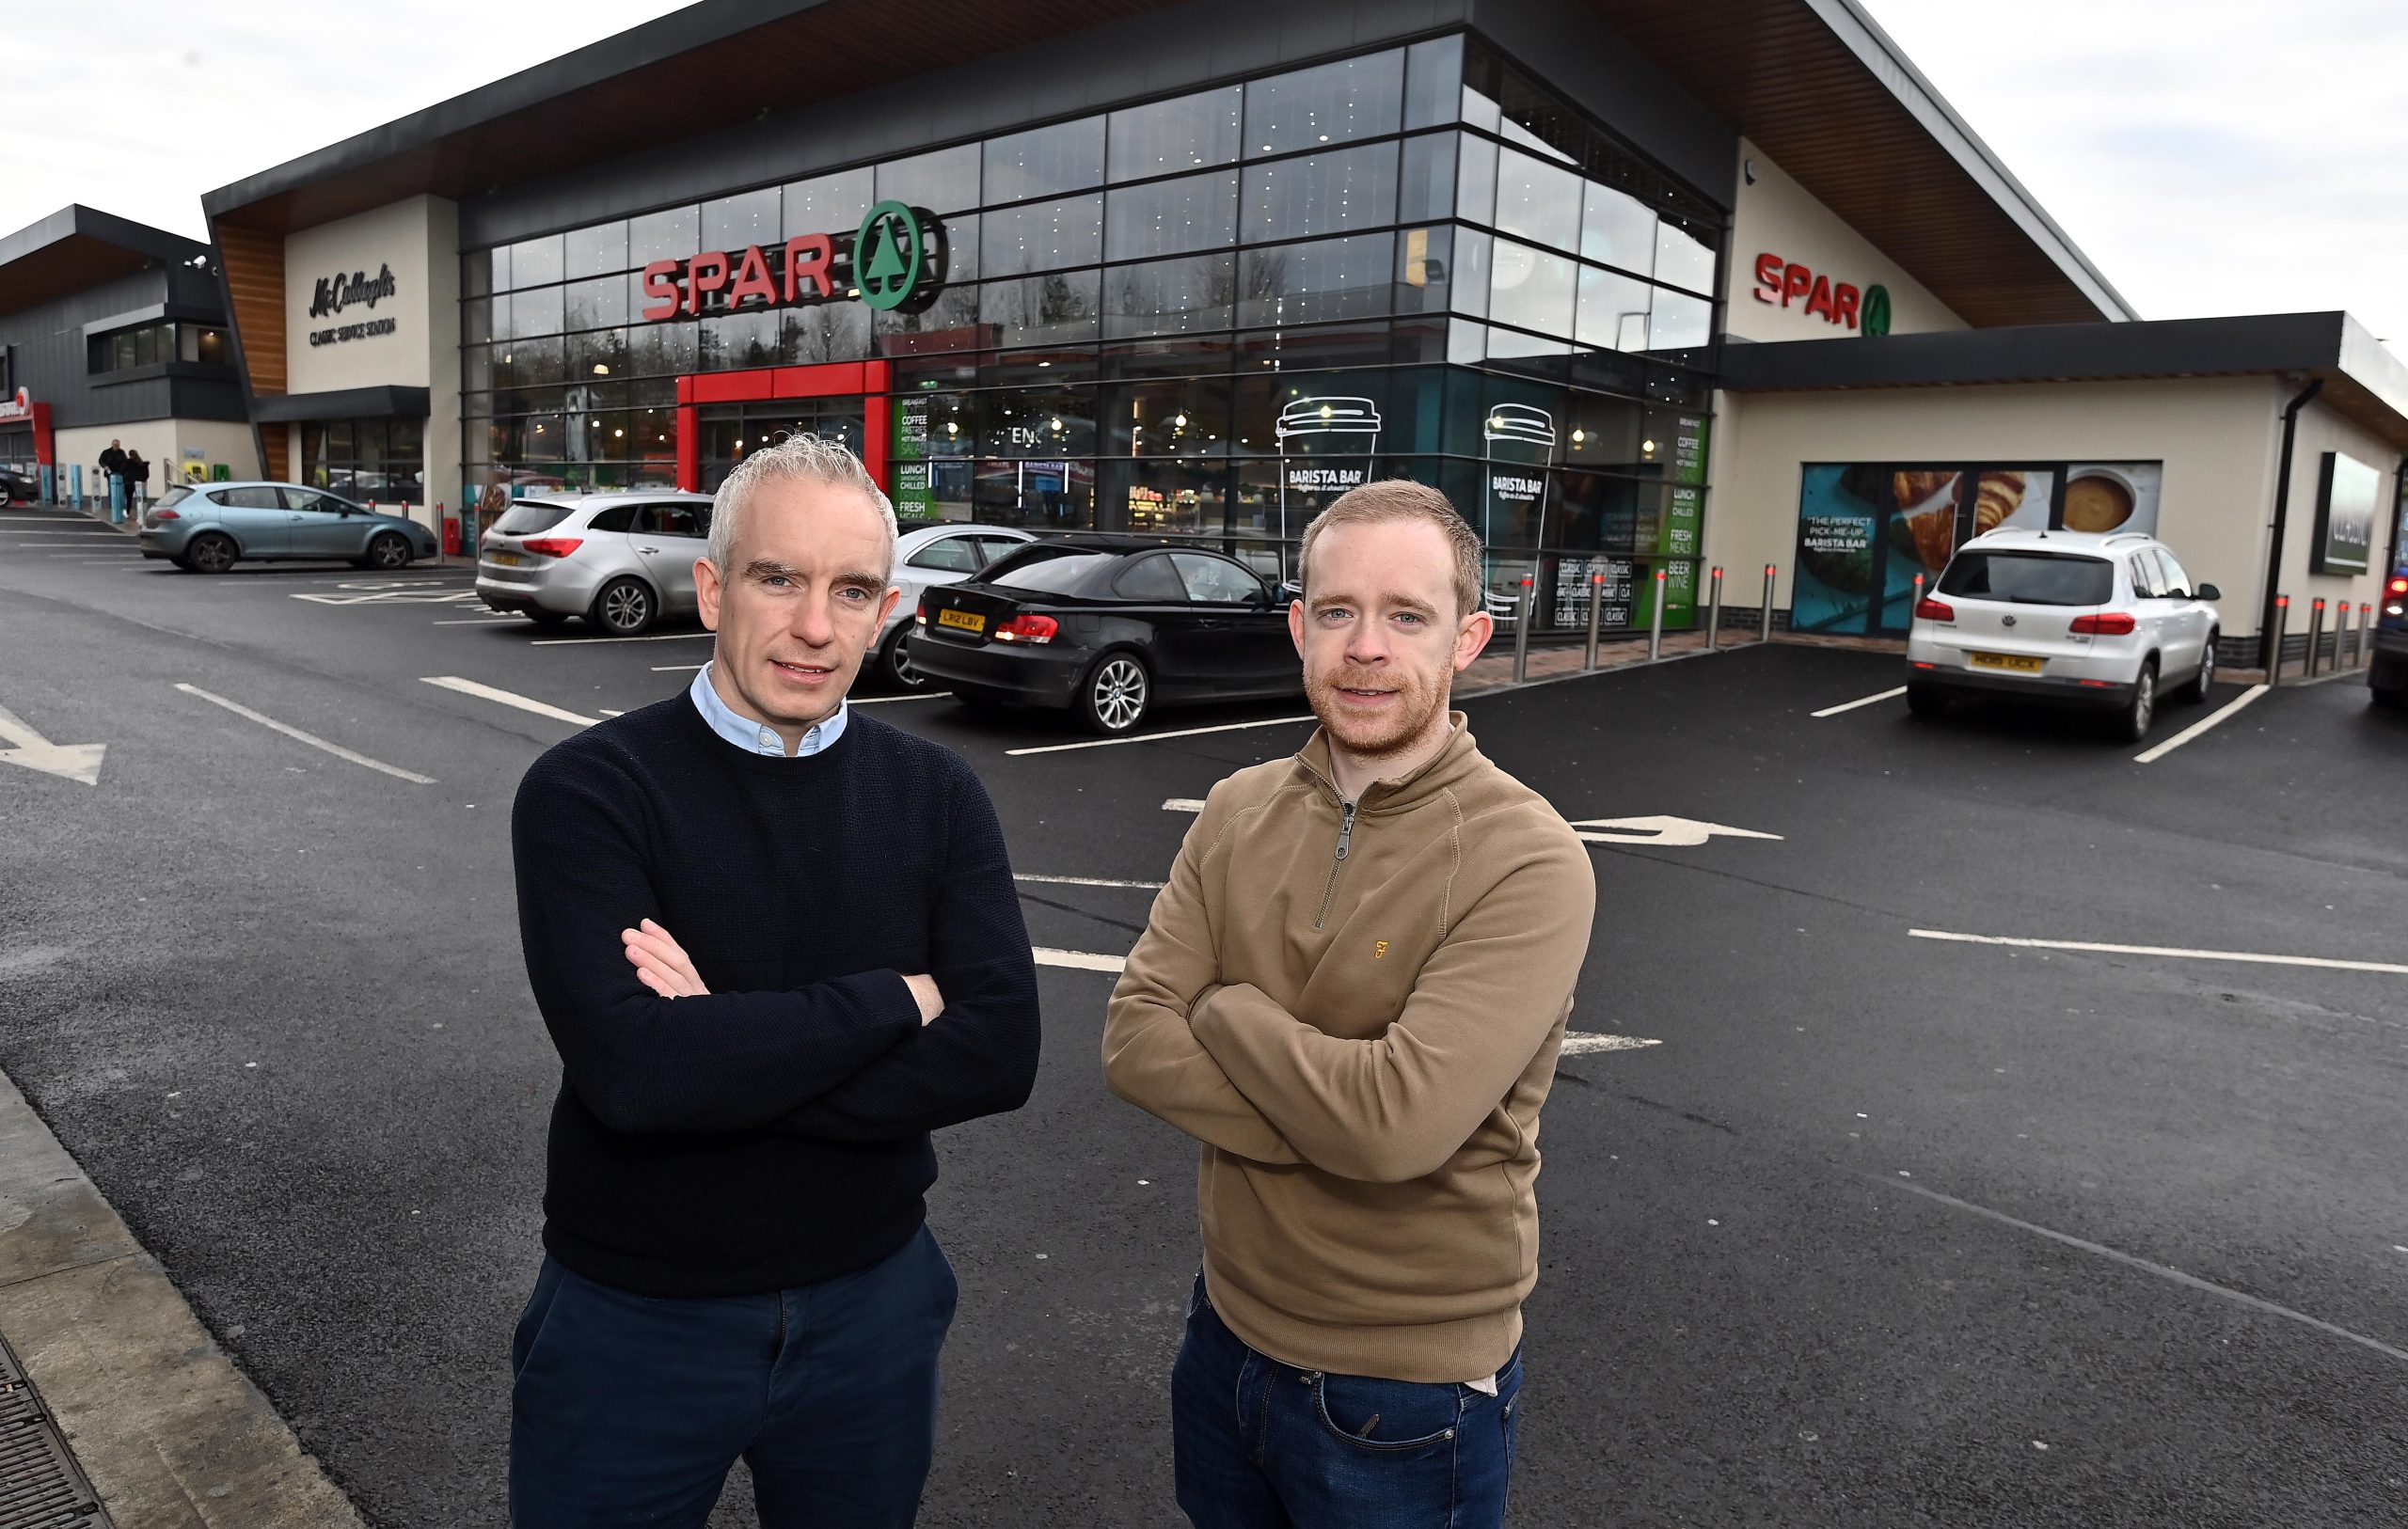 Winning NI Retailer of the Year is the pinnacle of our retail career as a family-run business